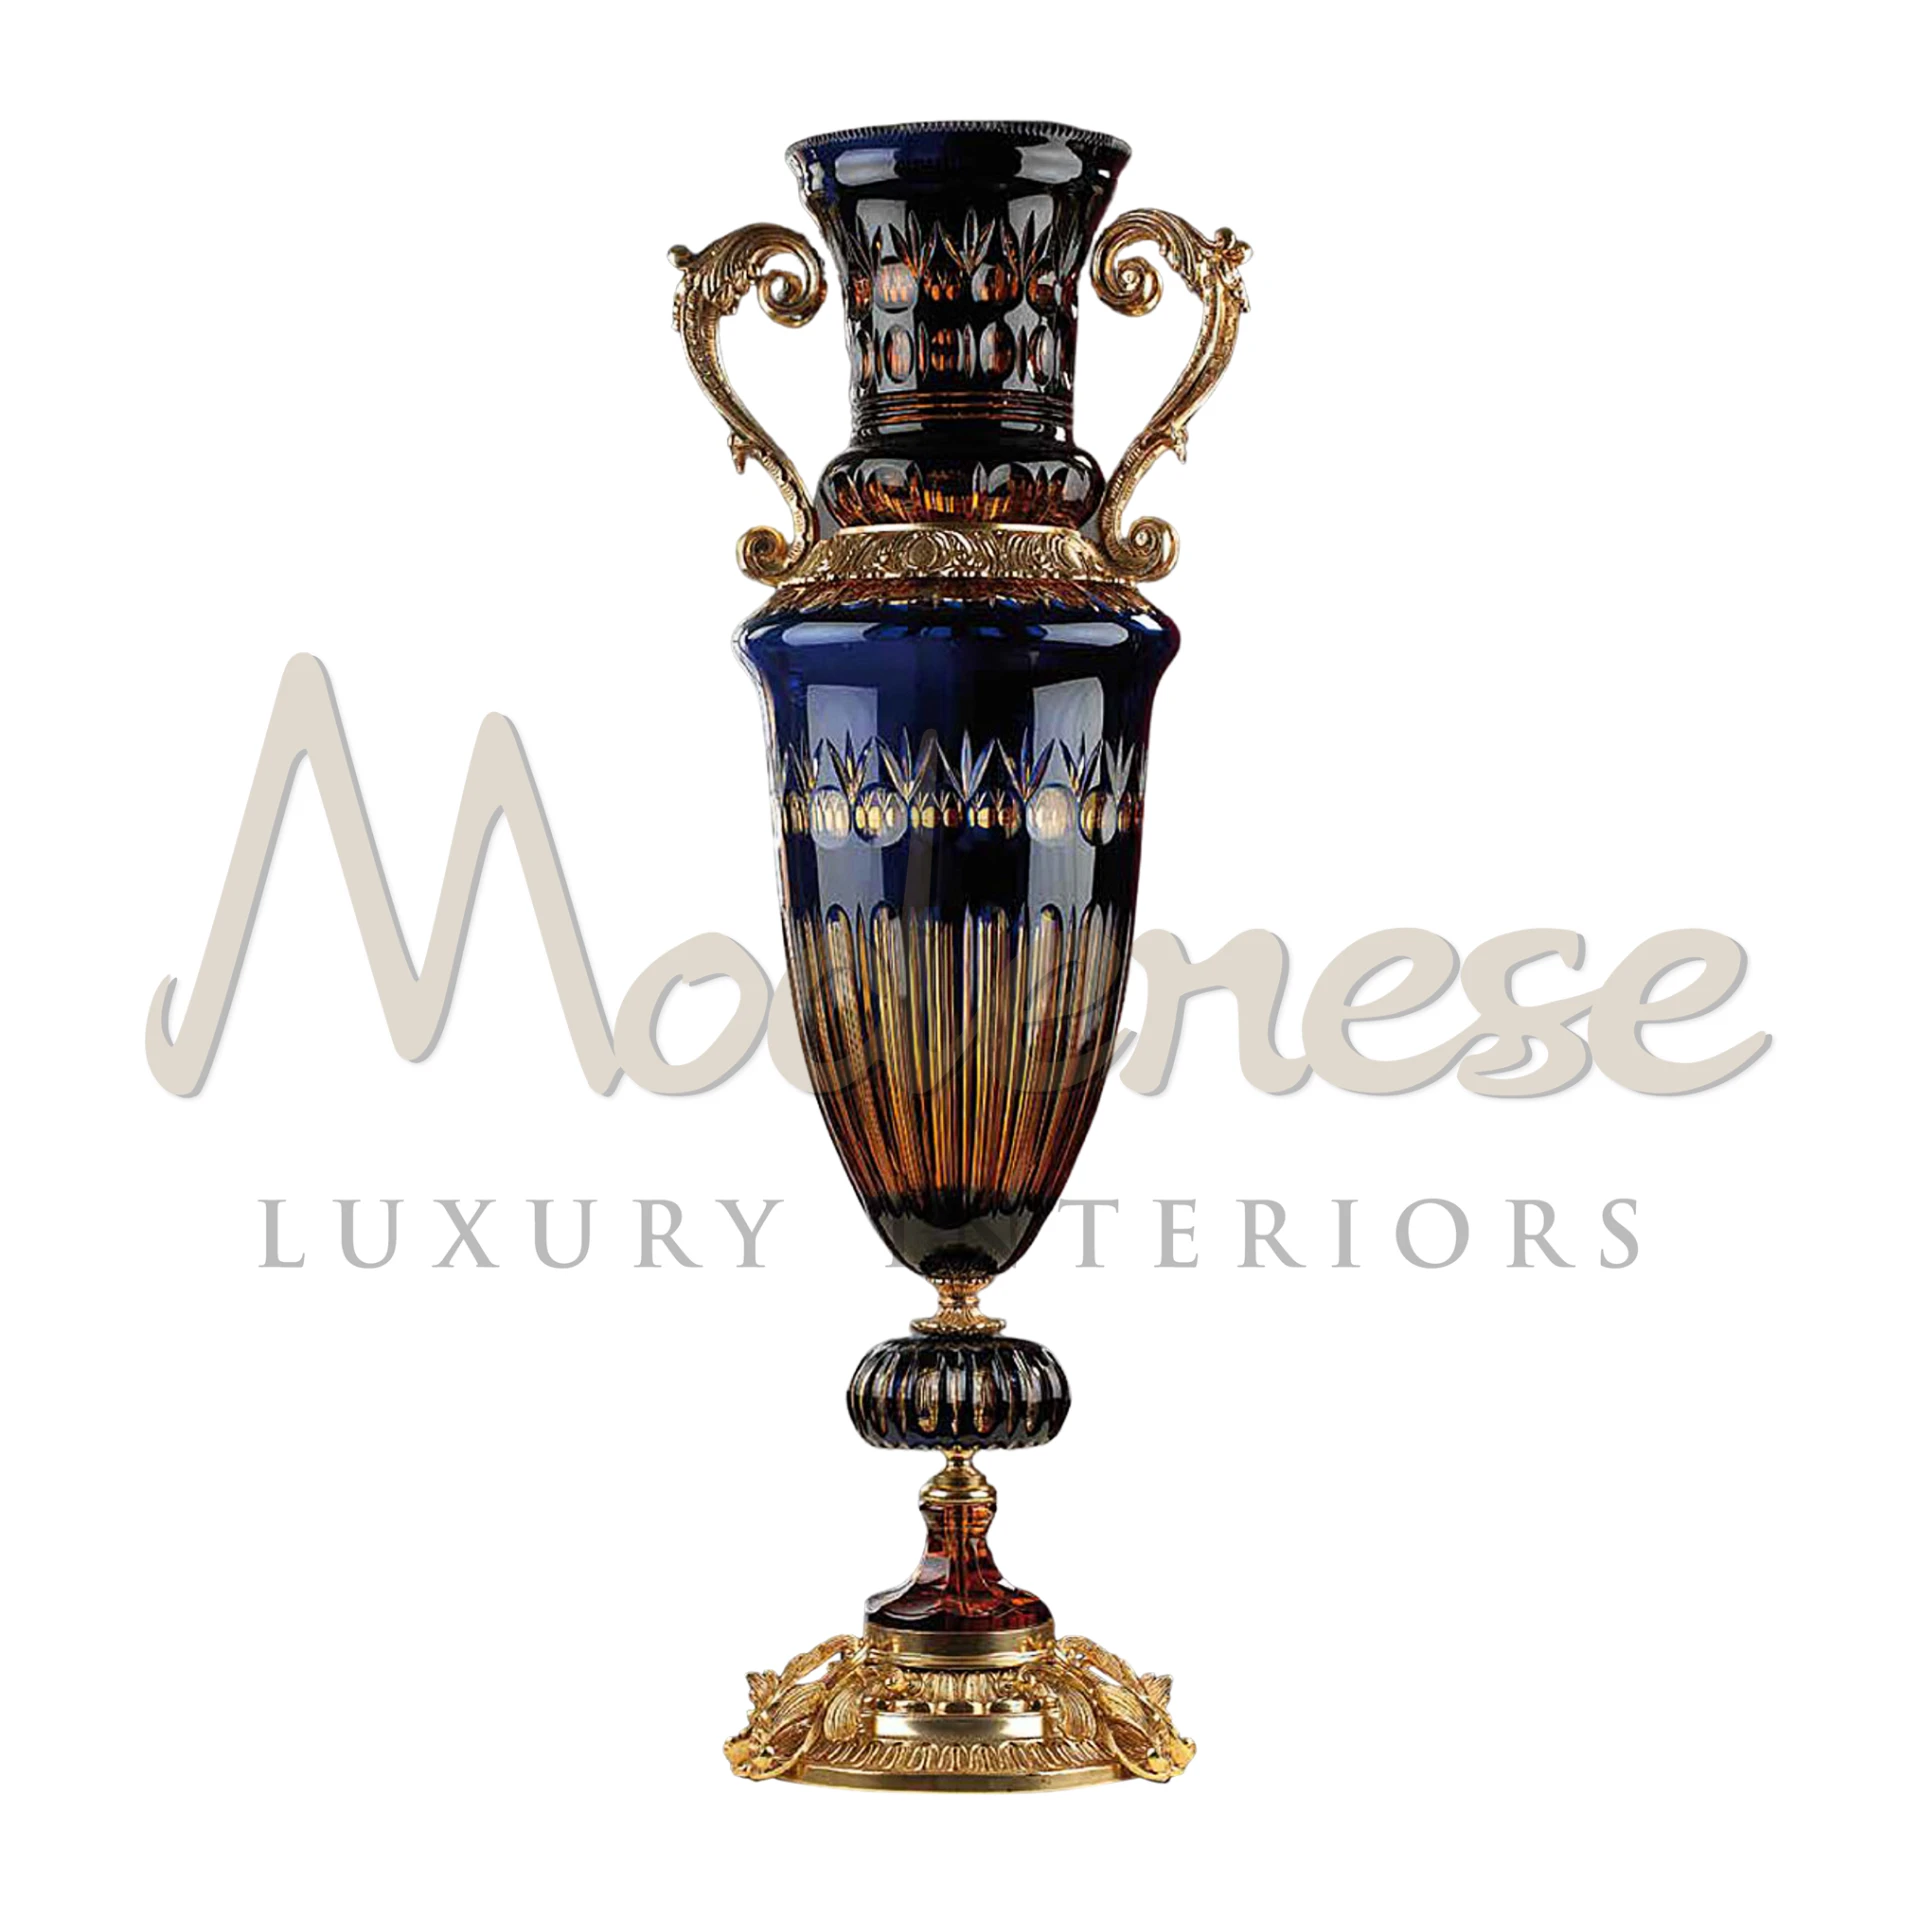 Opulent Royal Glass Two-Handled Vase, clear glass with intricate patterns, ideal for adding luxury to interiors.